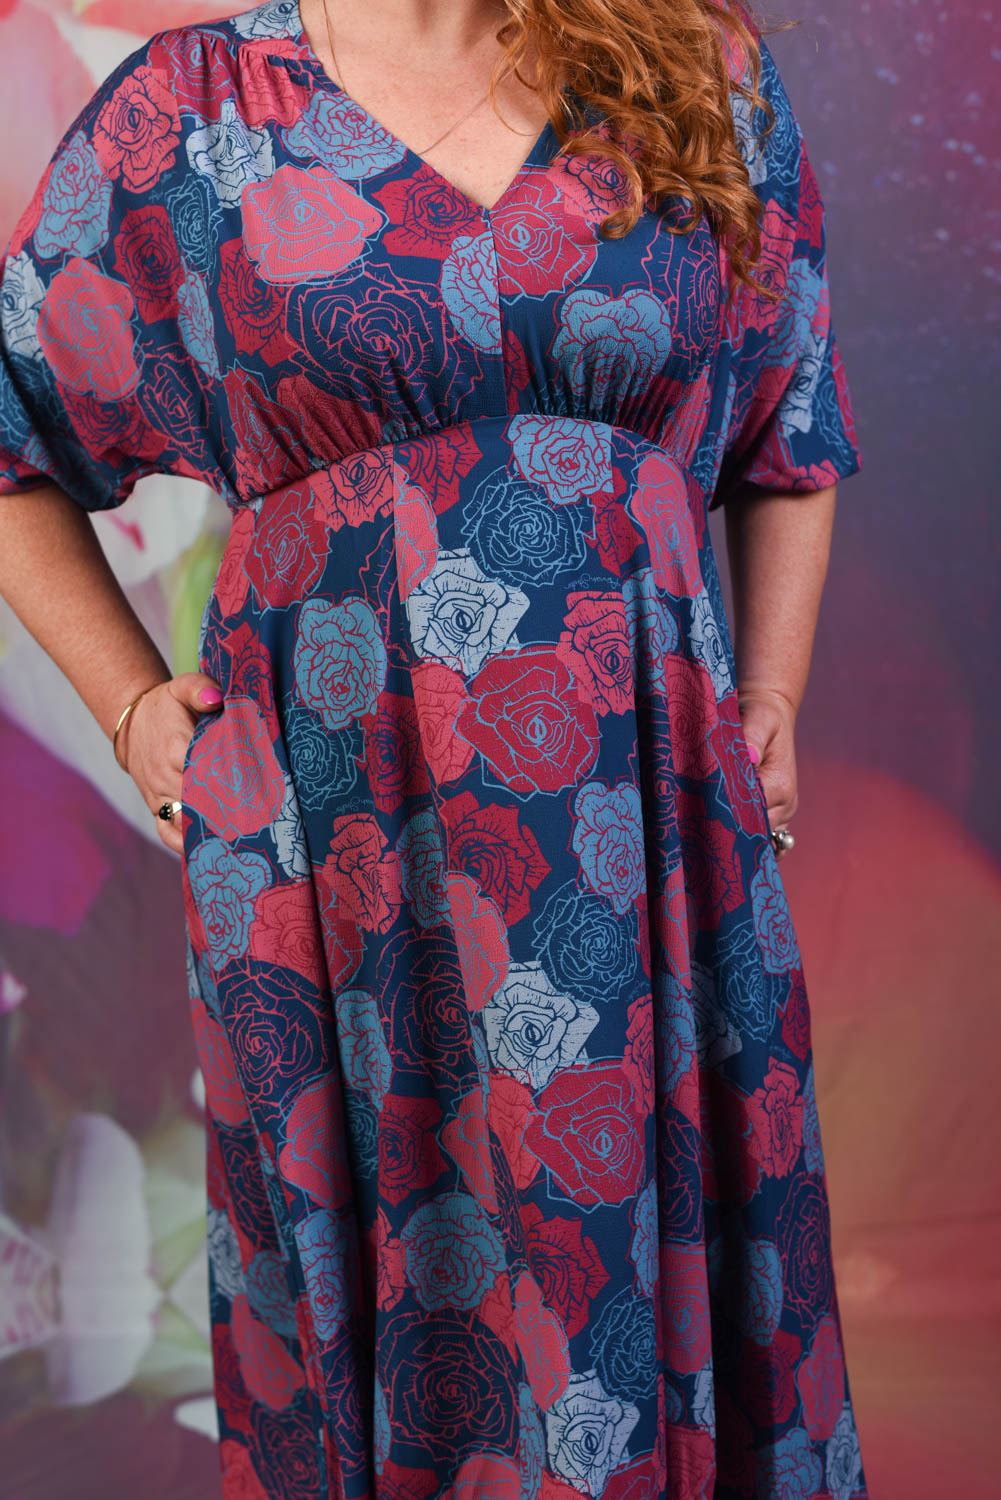 Closer shot of red and blue peony fabric on the Annah Stretton Peony Love dress